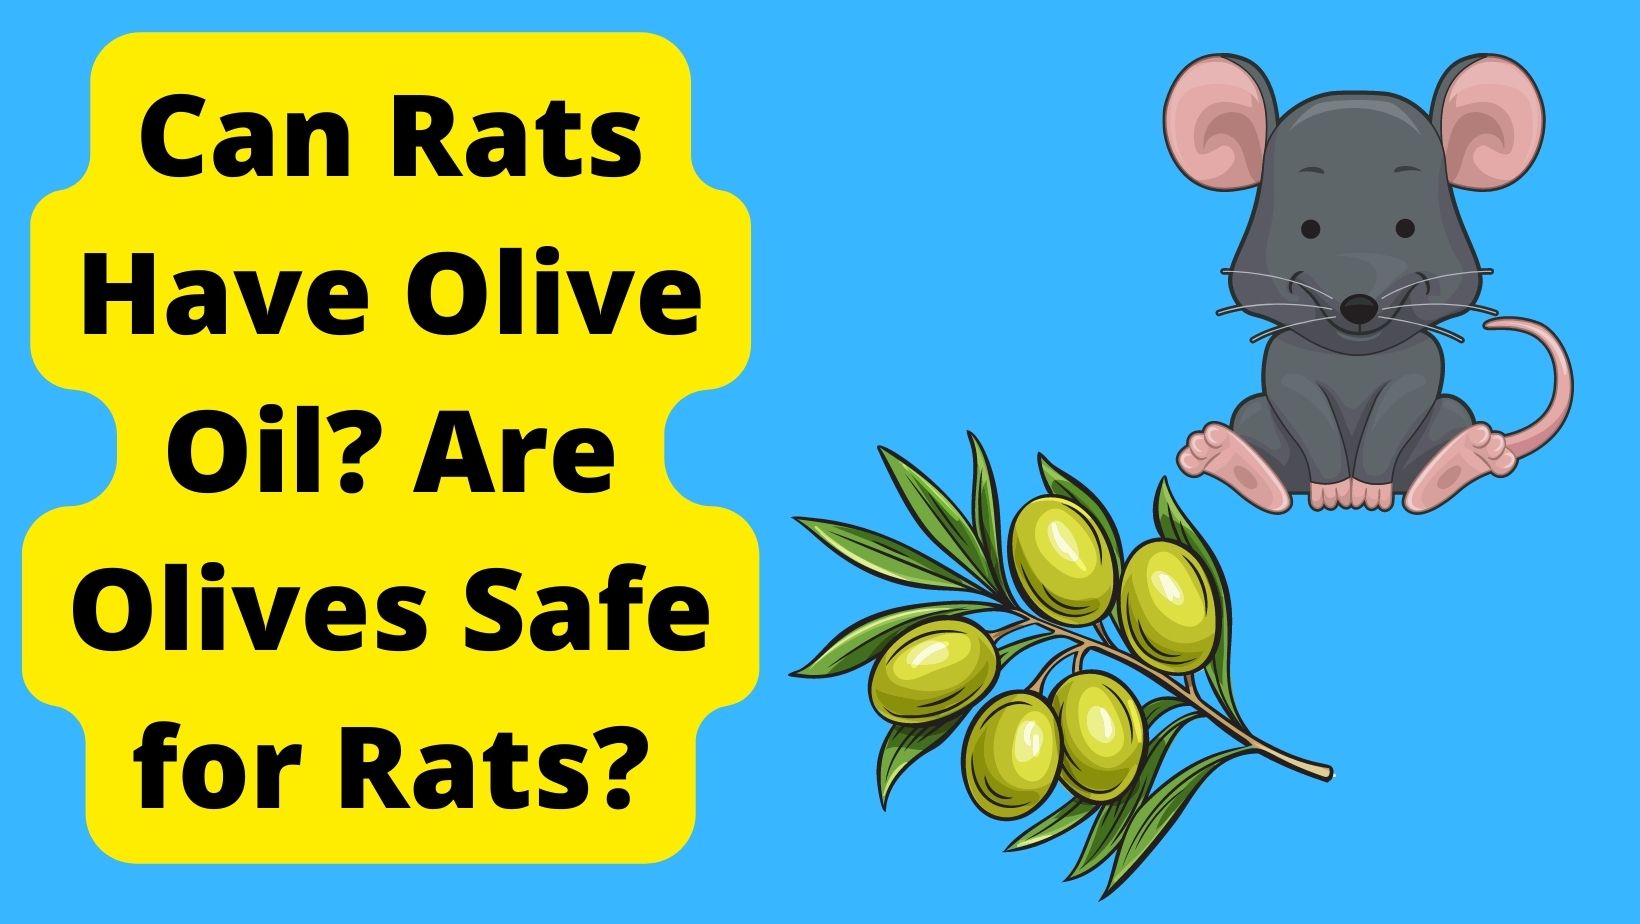 Can Rats Have Olive Oil? What About Olives?